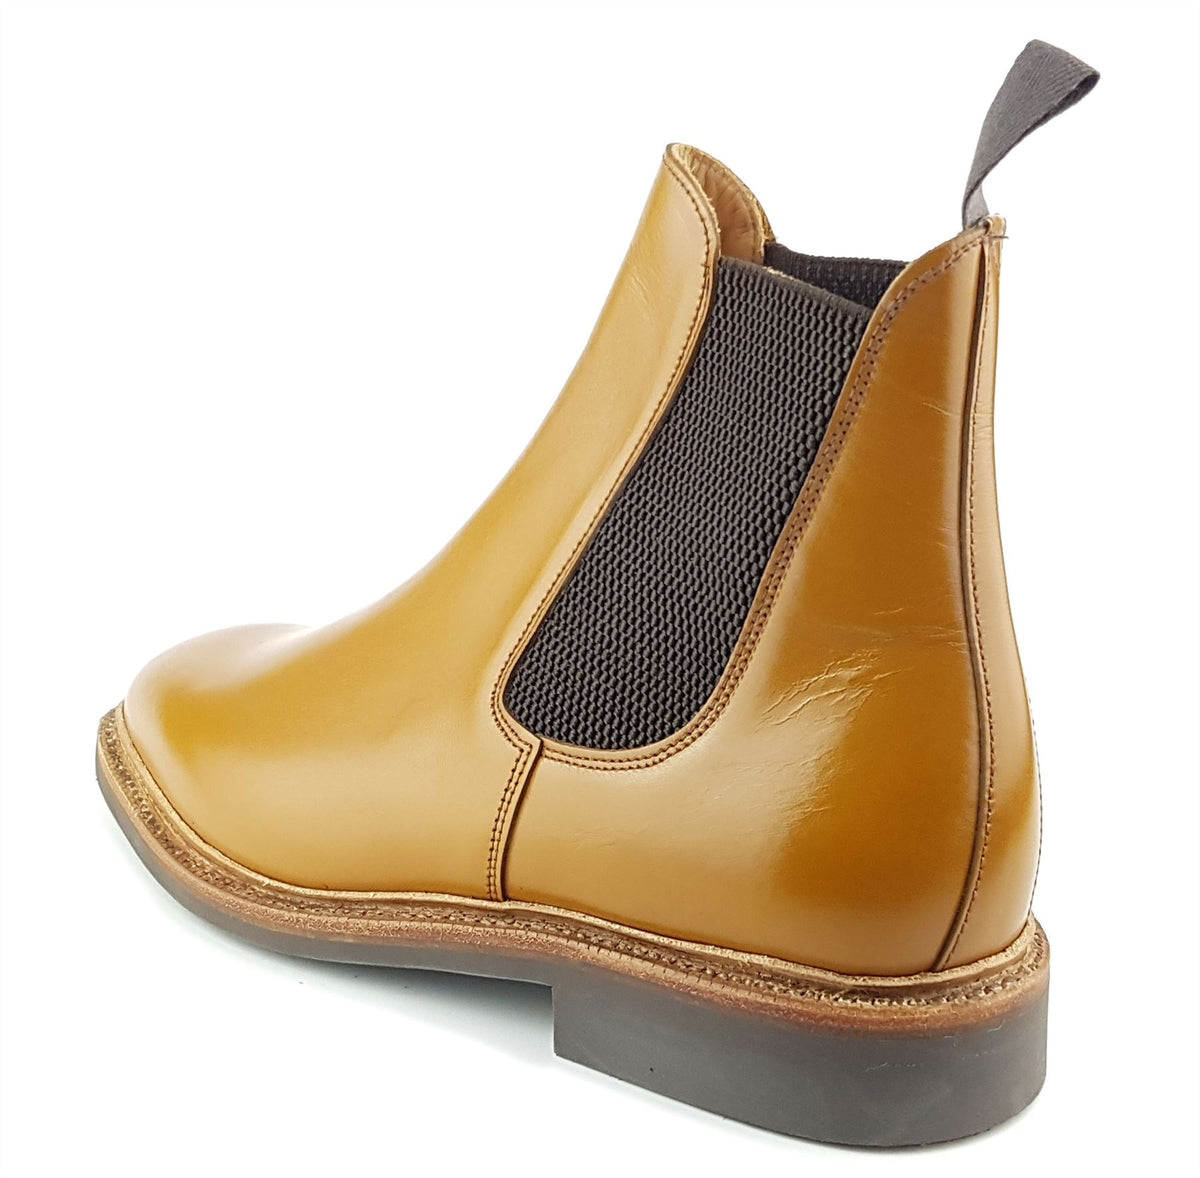 Charles Horrel England CH2013 Welted Commando Chelsea Boots